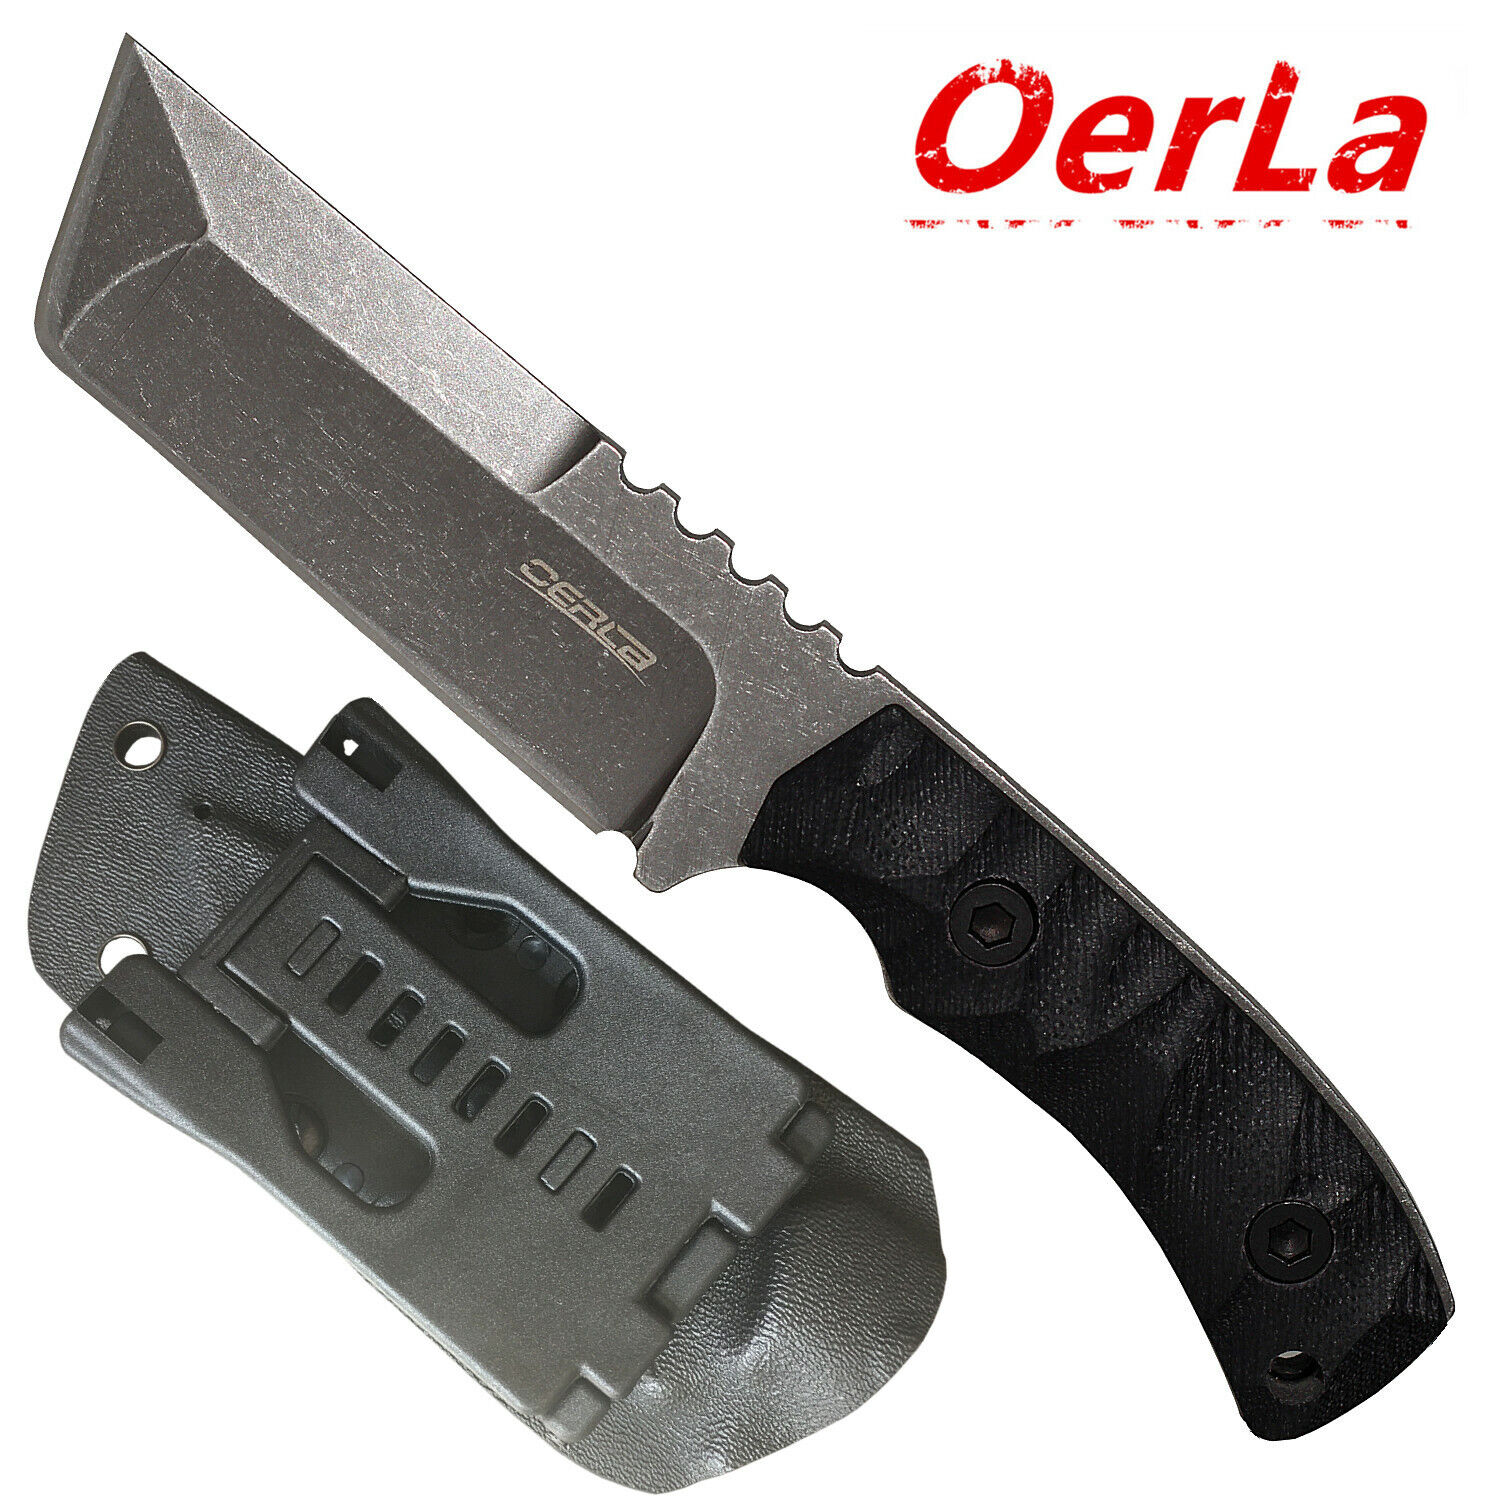 Oerla Field Knife Fixed Blade Stonewashed Cleaver G10 Handle and Kydex Sheath